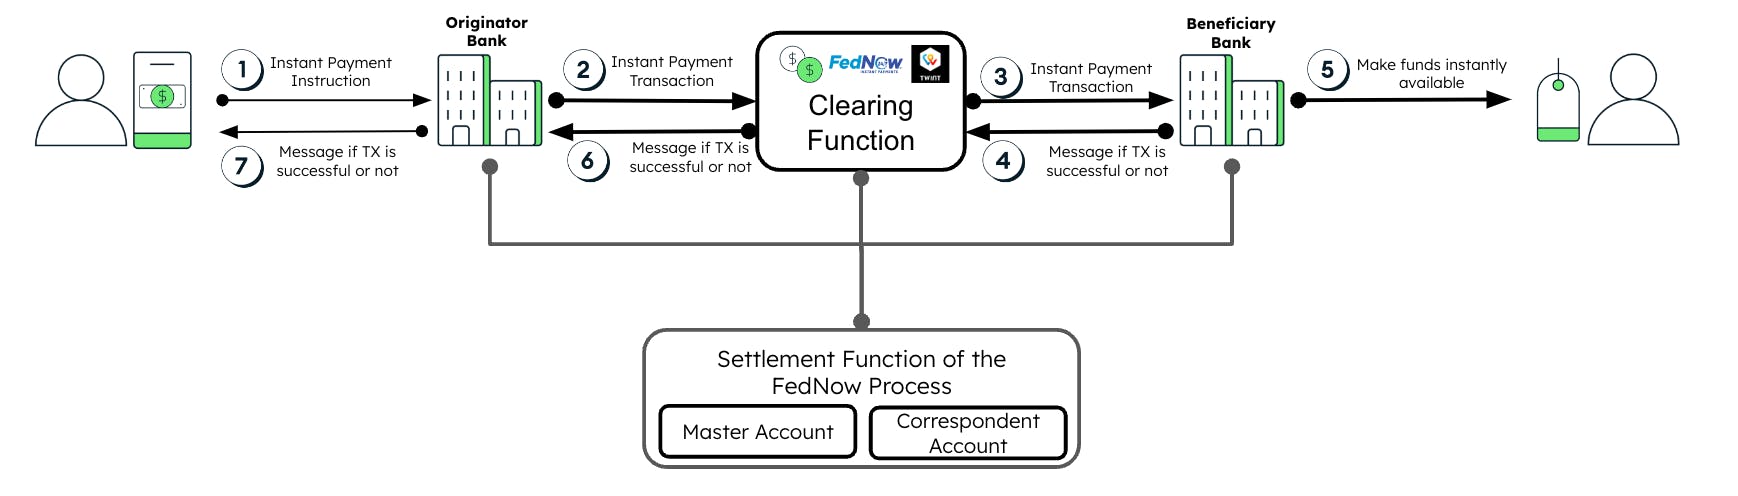 An illustration showing how the FedNow Service uses the real time payments solution.